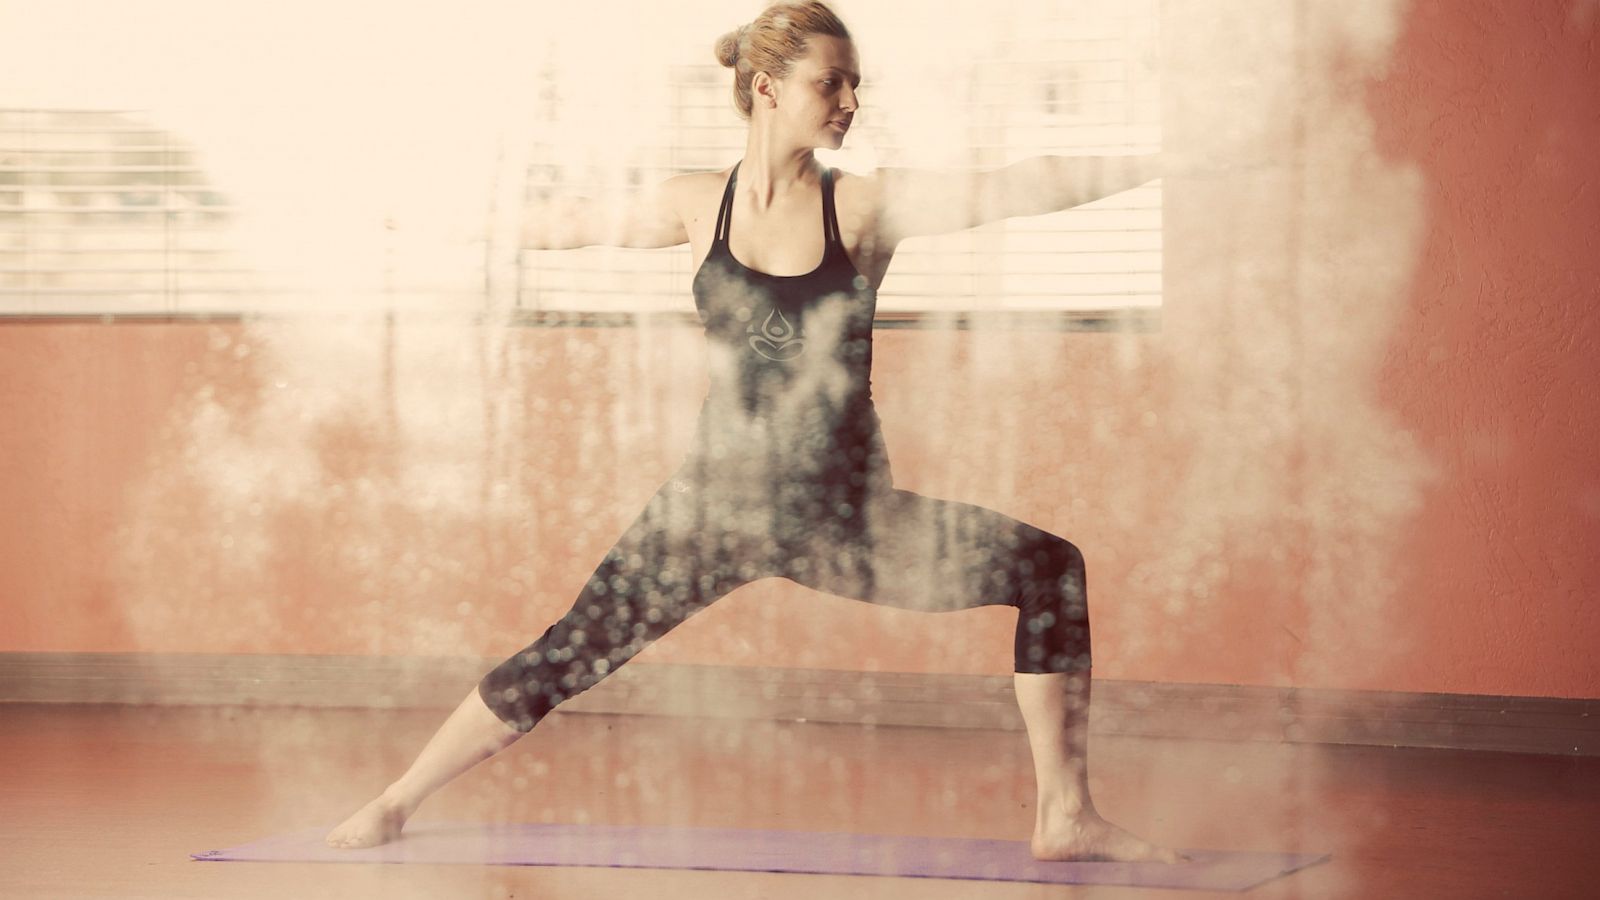 Hot yoga: Benefits, safety, and more